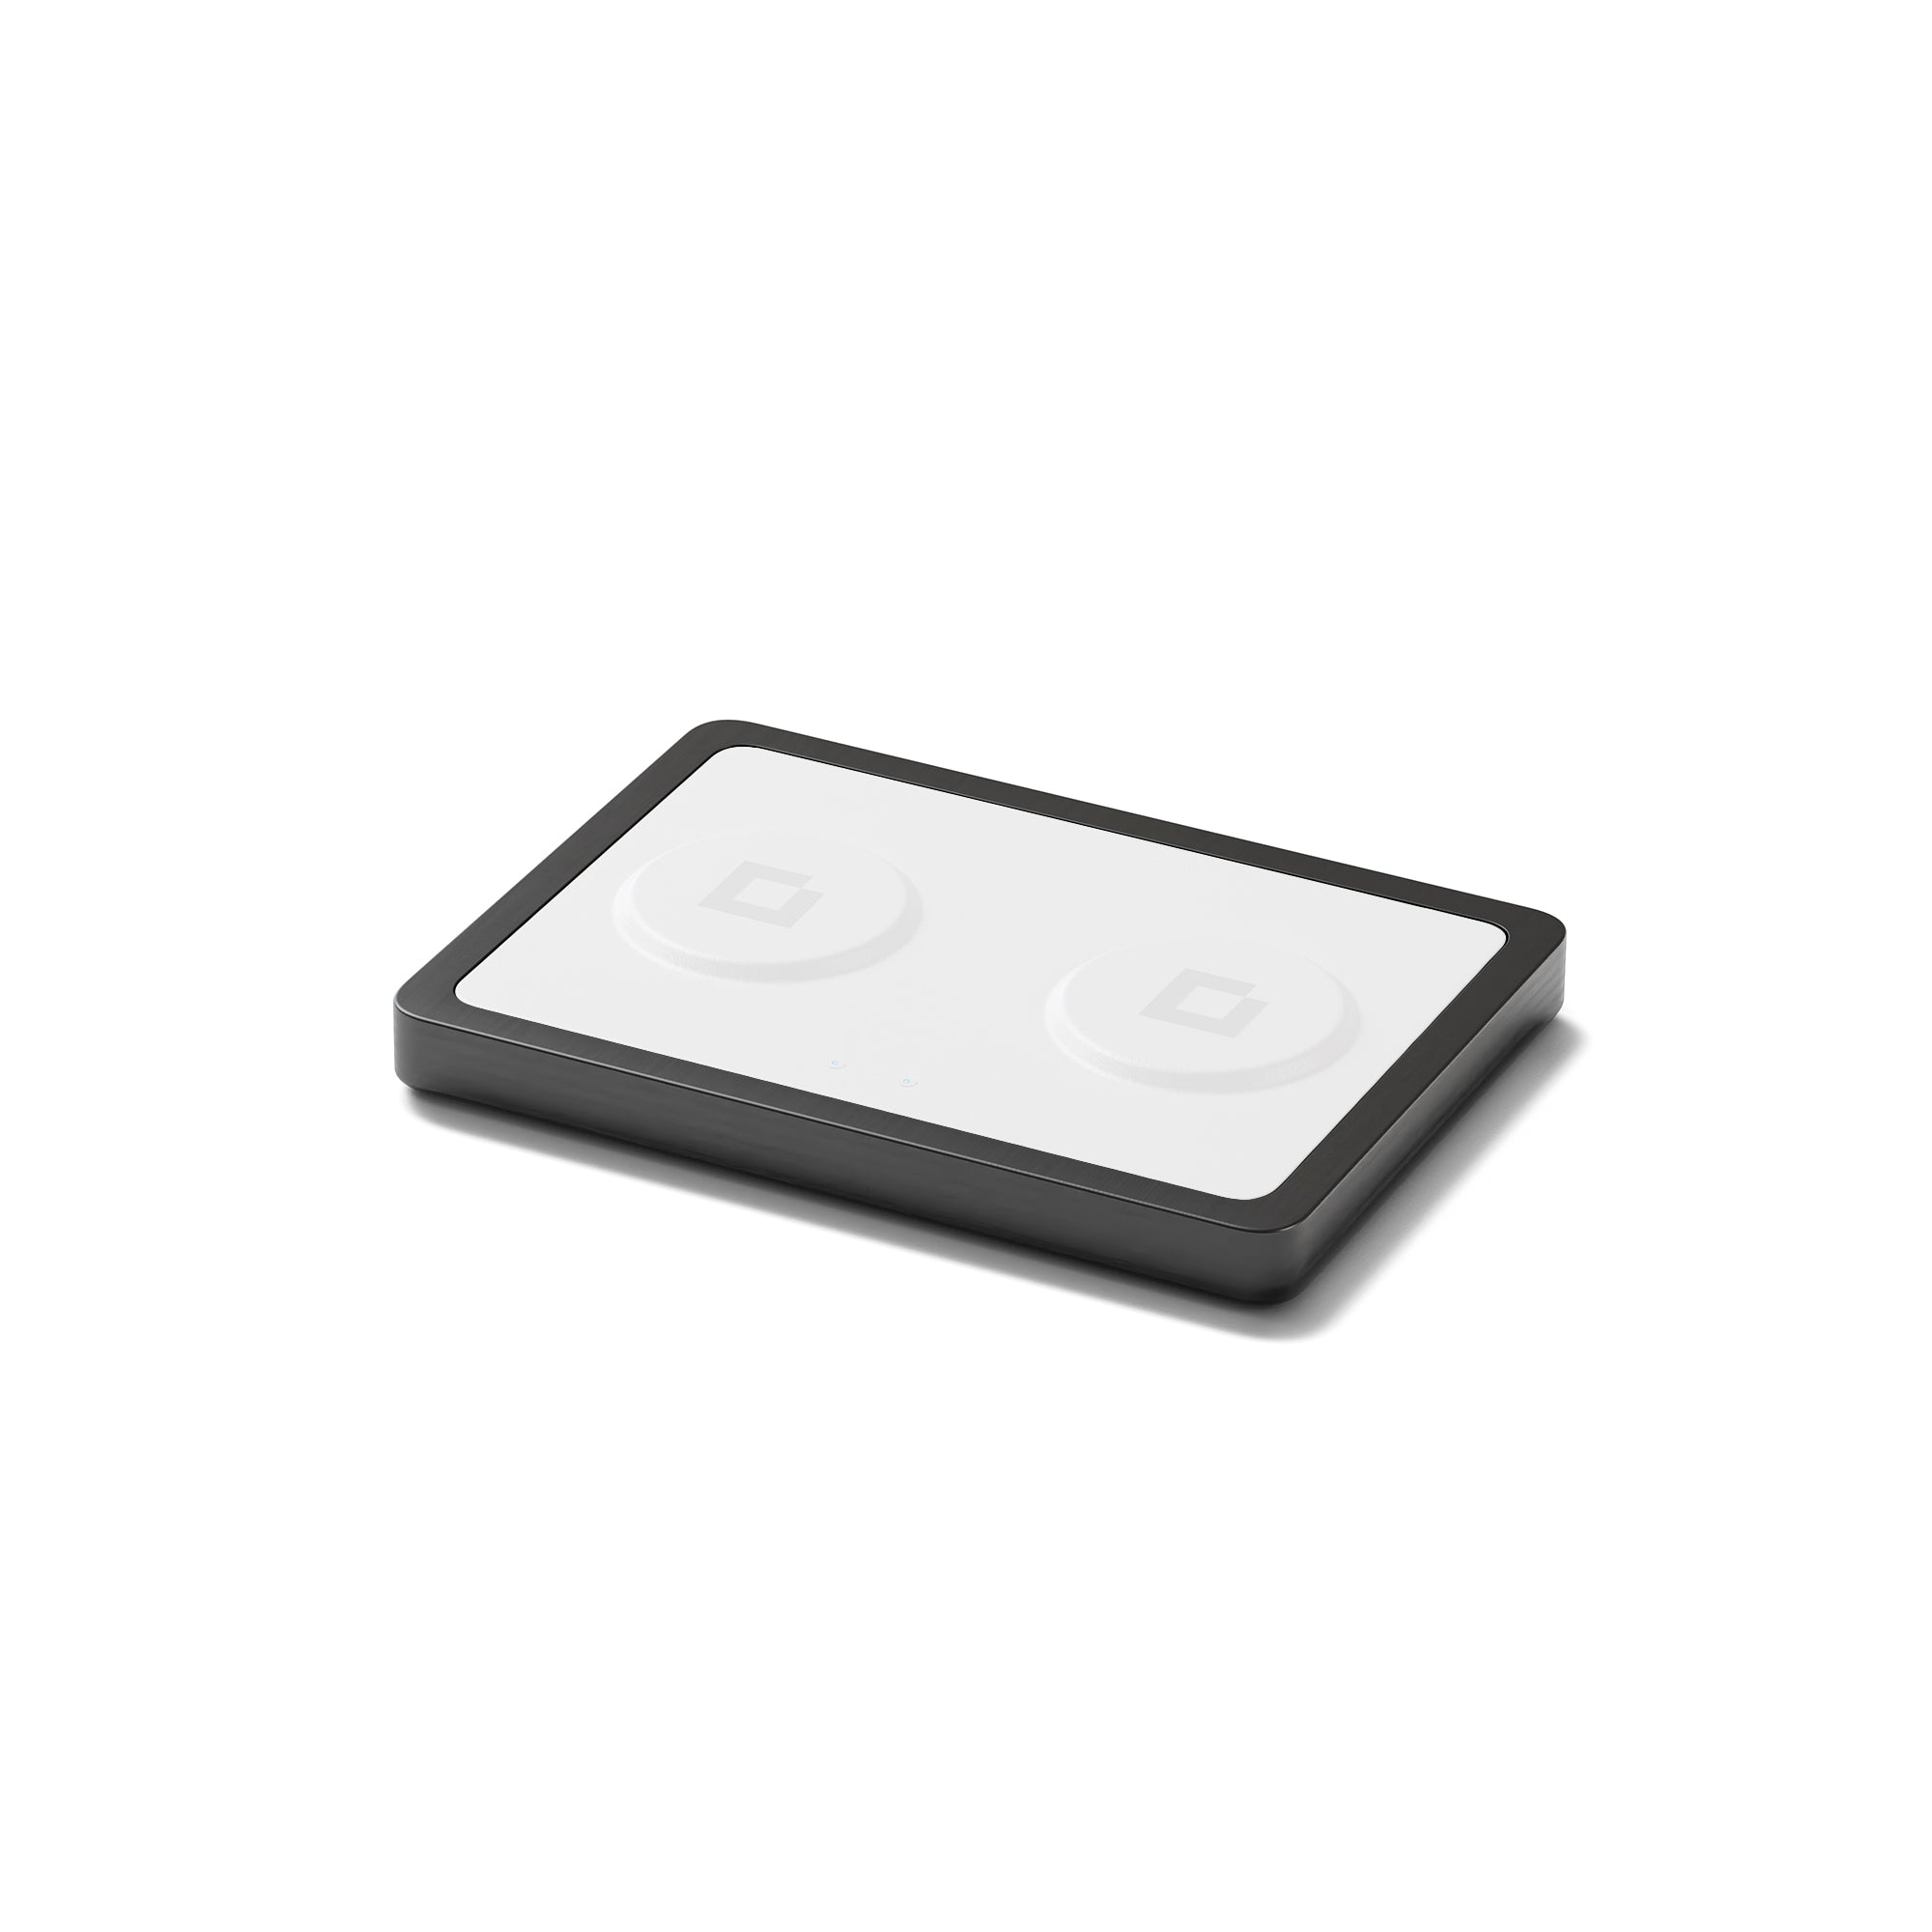 DUO White - 2-in-1 MagSafe Midnight Black Wireless Charger with USB-C and A Ports Support angle view without devices